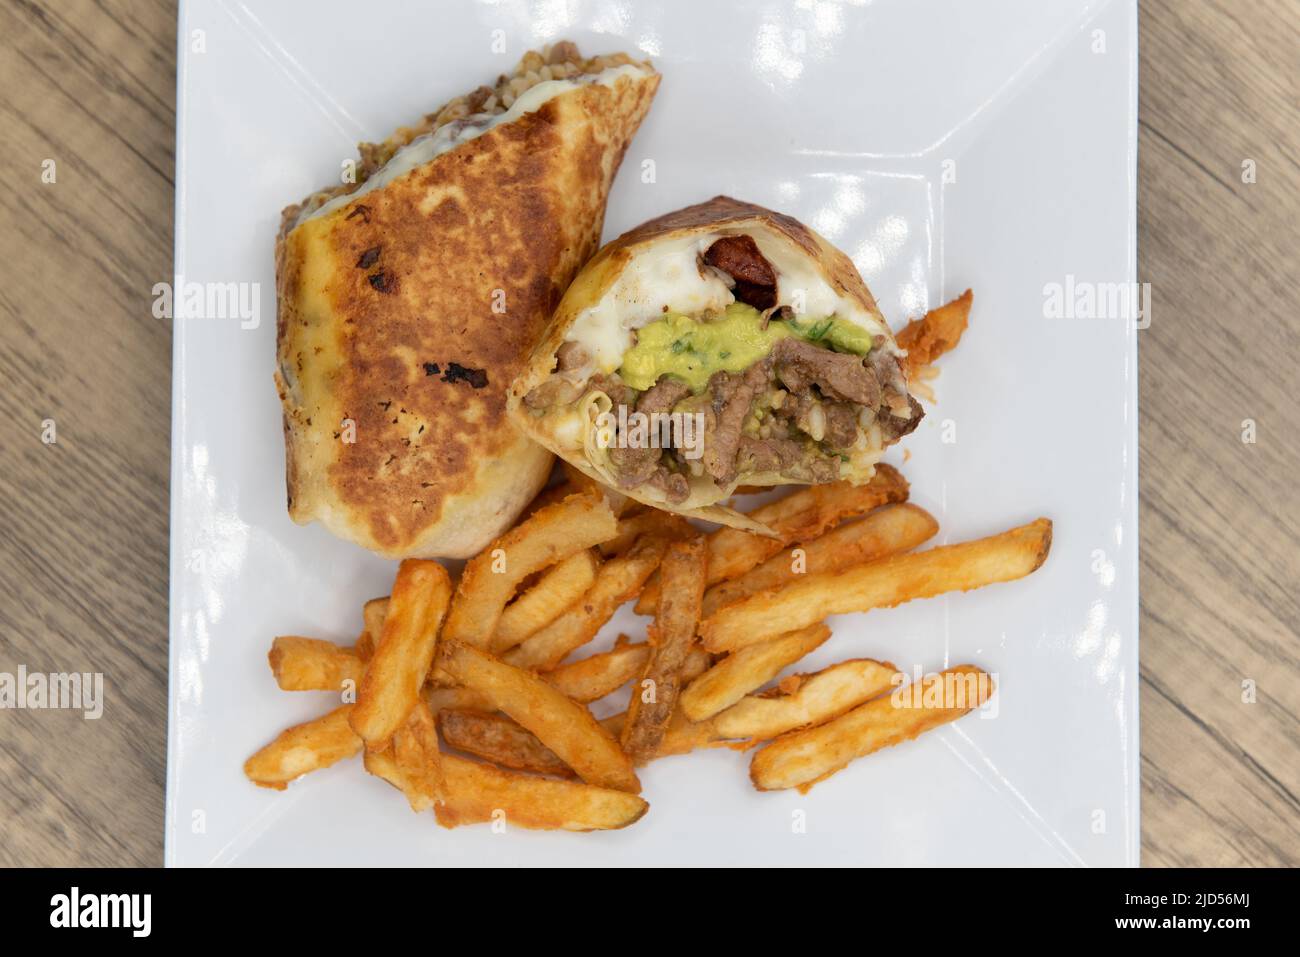 Overhead view of appetizing carne asada steak burrito cut in half and served with french fries for a tempting Mexican food delicacy. Stock Photo